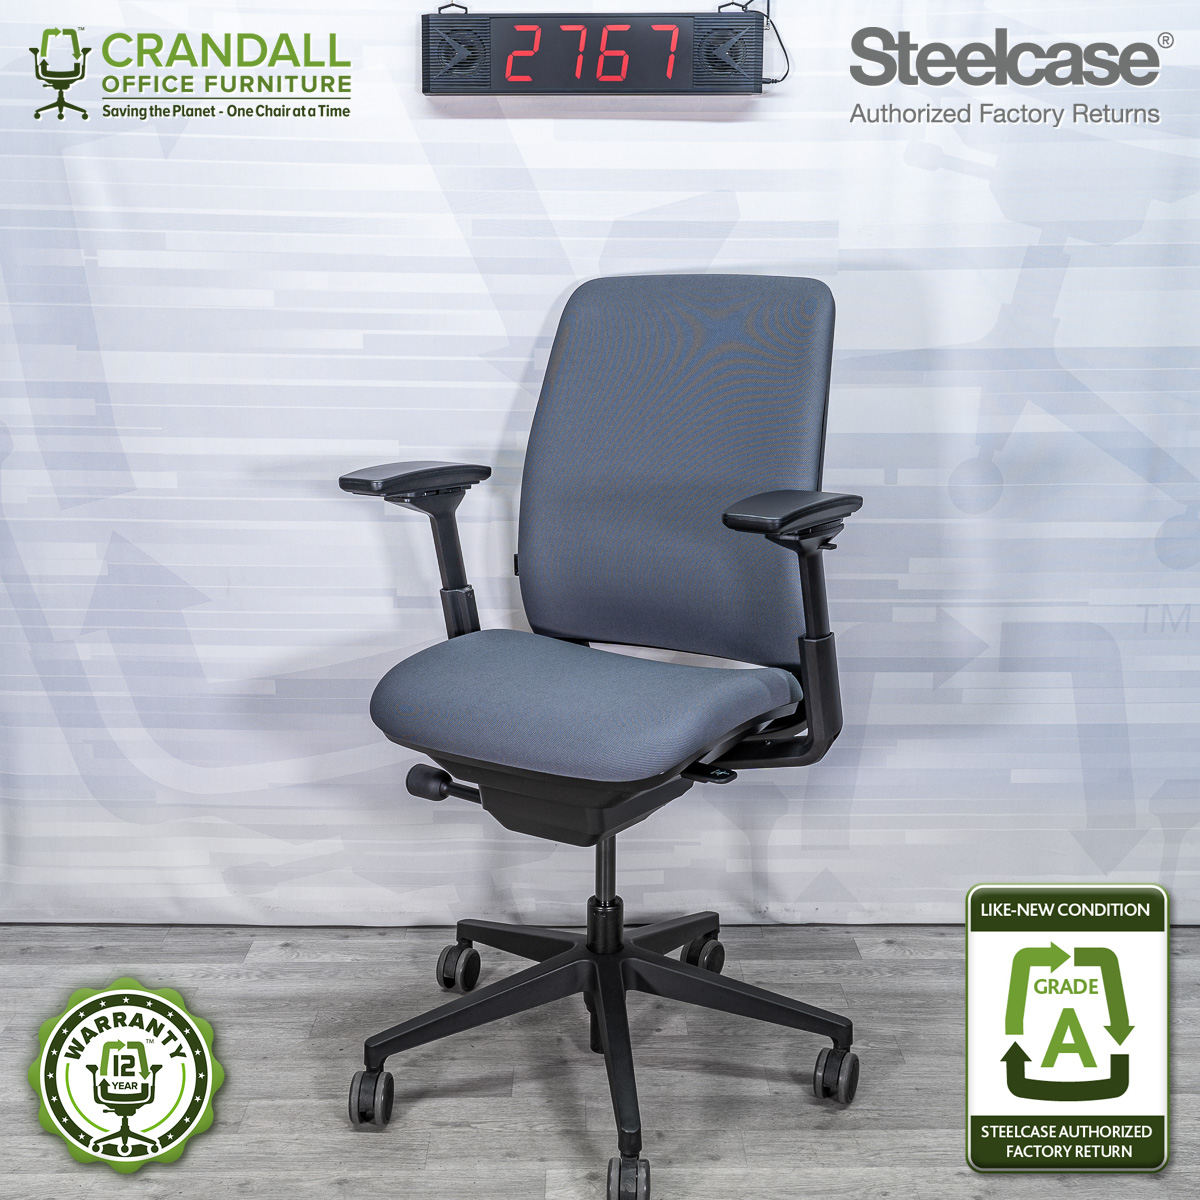 Steelcase Amia Chair Upholstery + New Seat Pad - Crandall Office Furniture